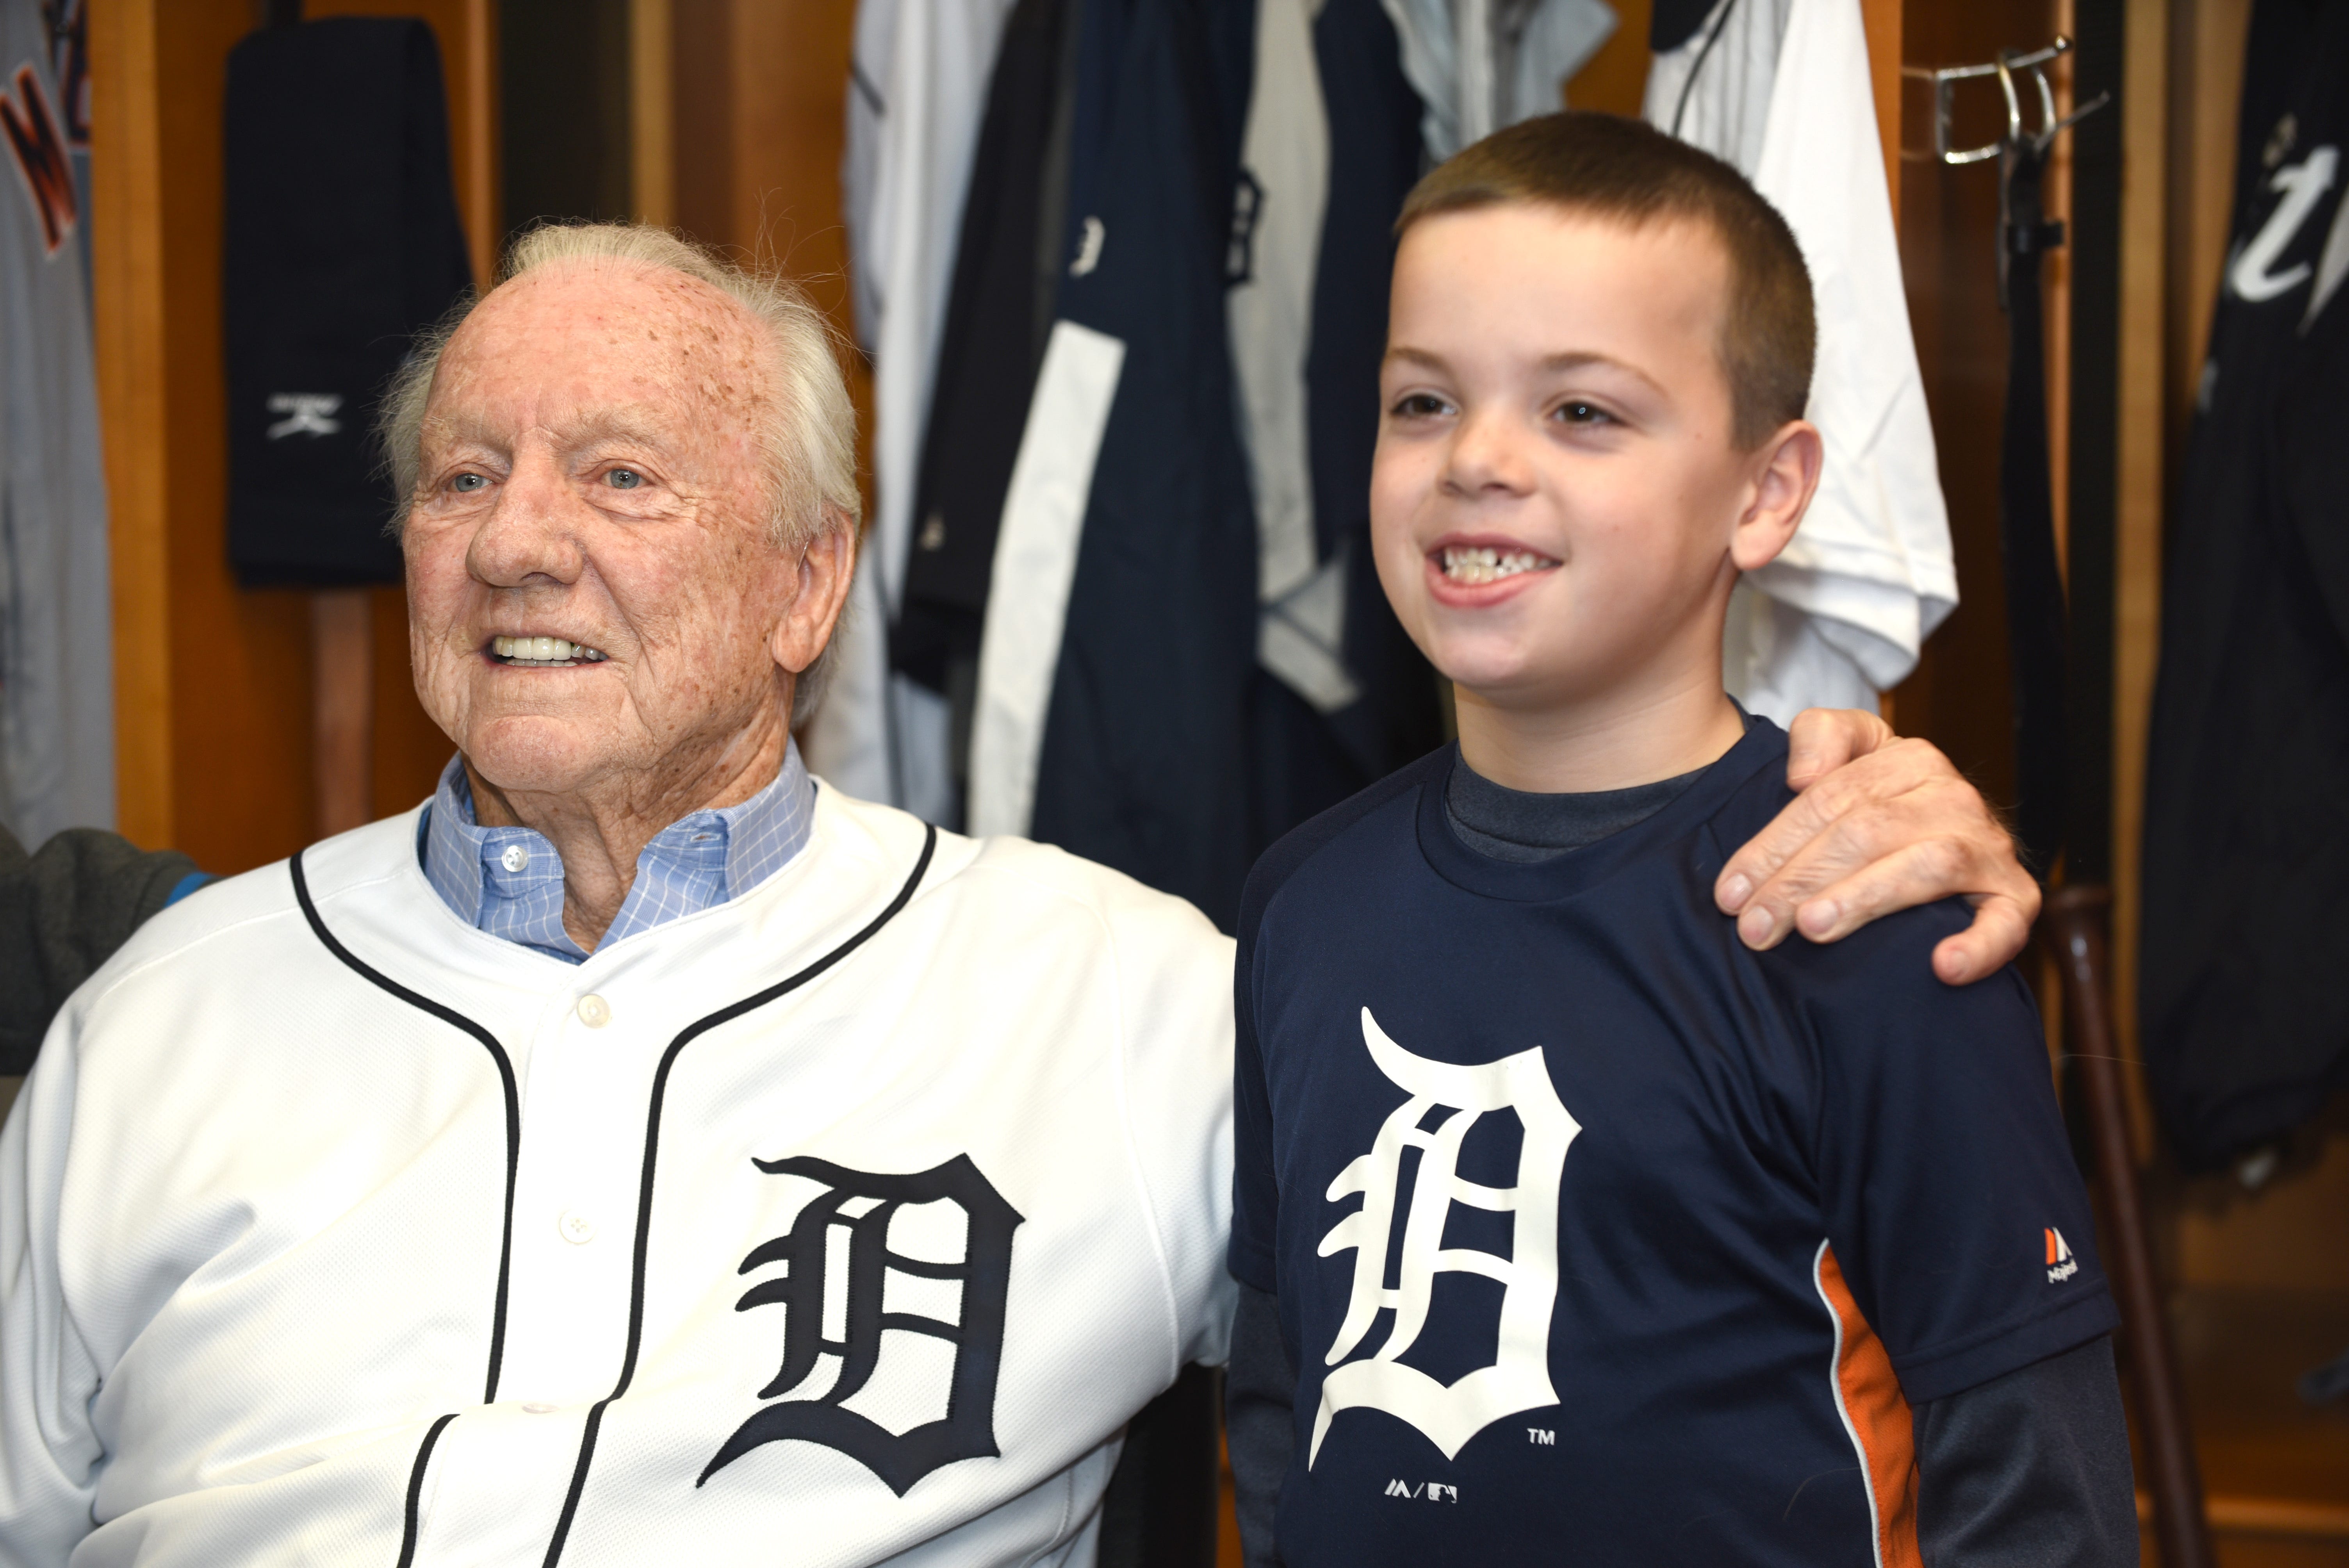 Detroit Tigers Al Kaline takes a picture with Nick Giorgi of Troy during TigerFest 2019 at Comerica Park.